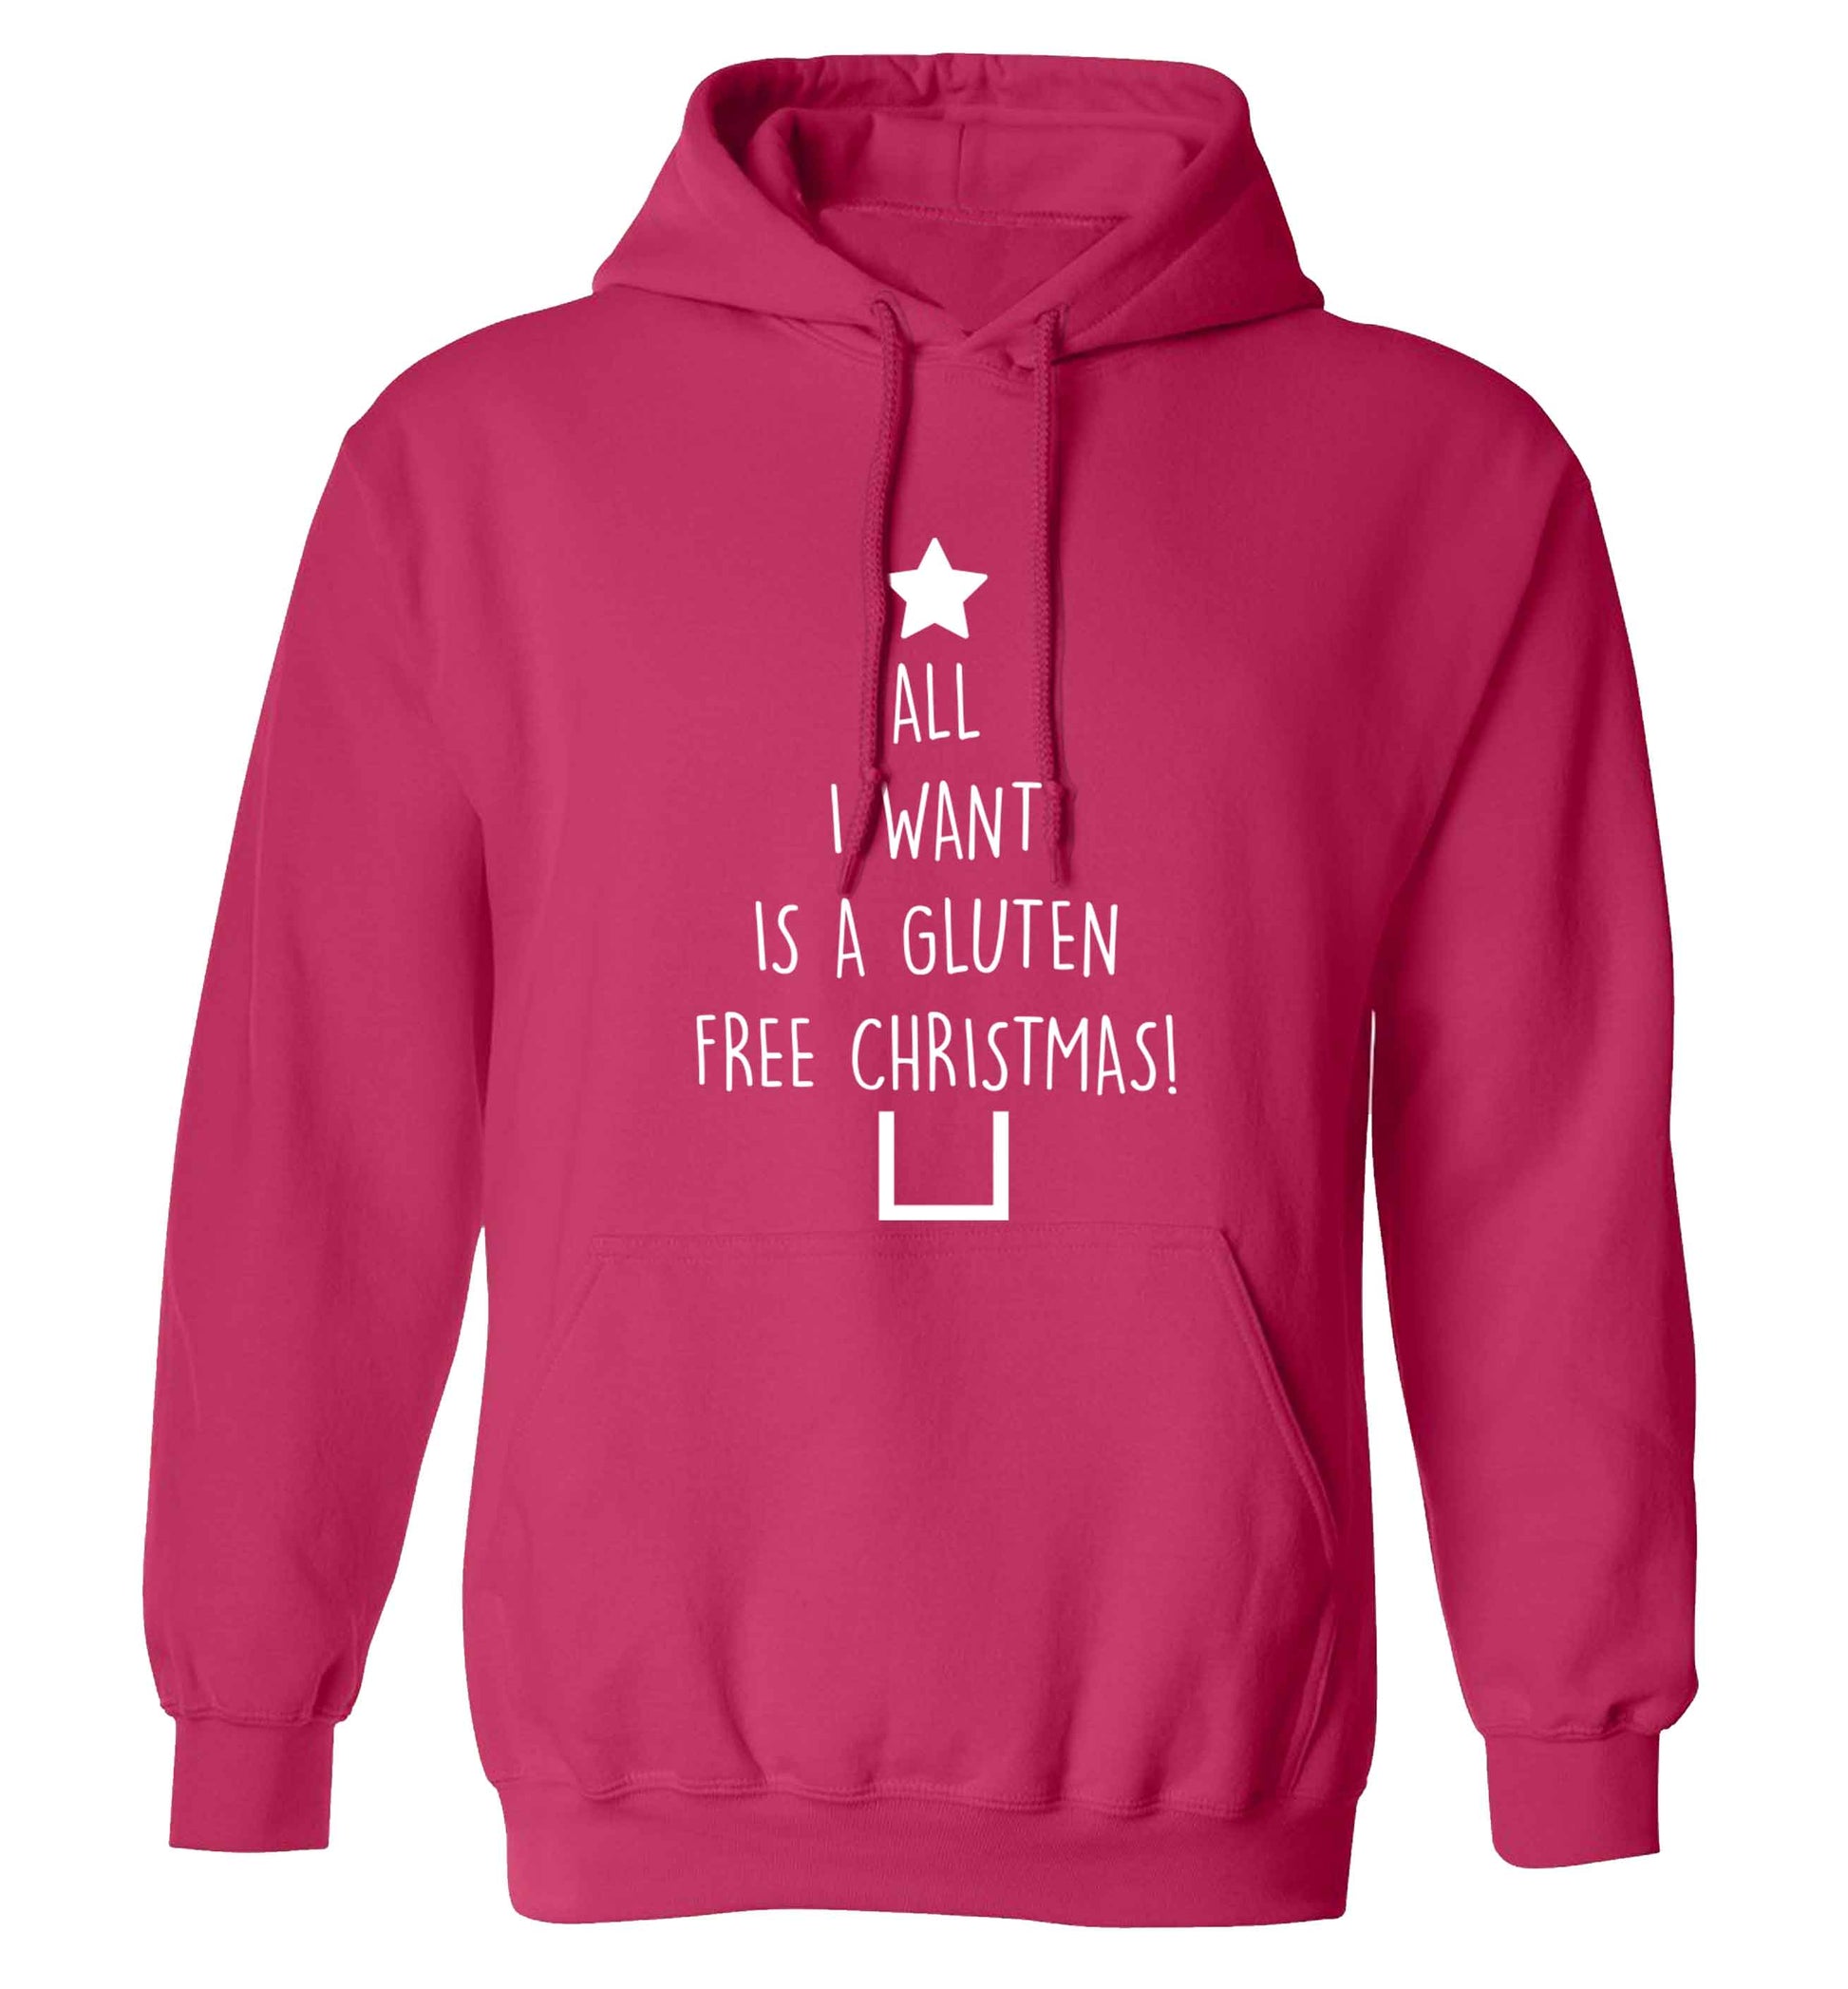 All I want is a gluten free Christmas adults unisex pink hoodie 2XL